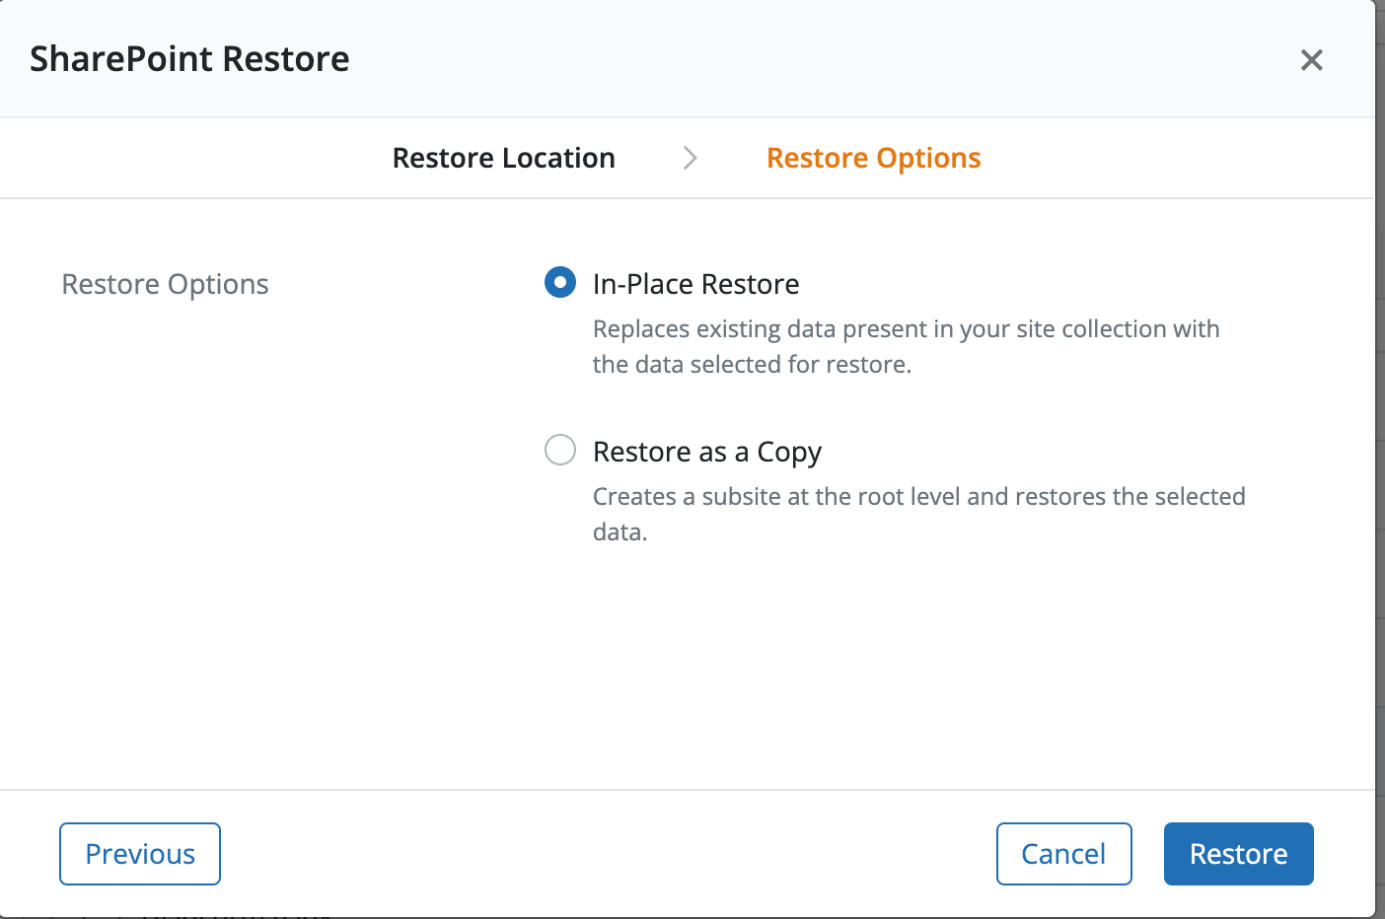 You can select In-Place Restore